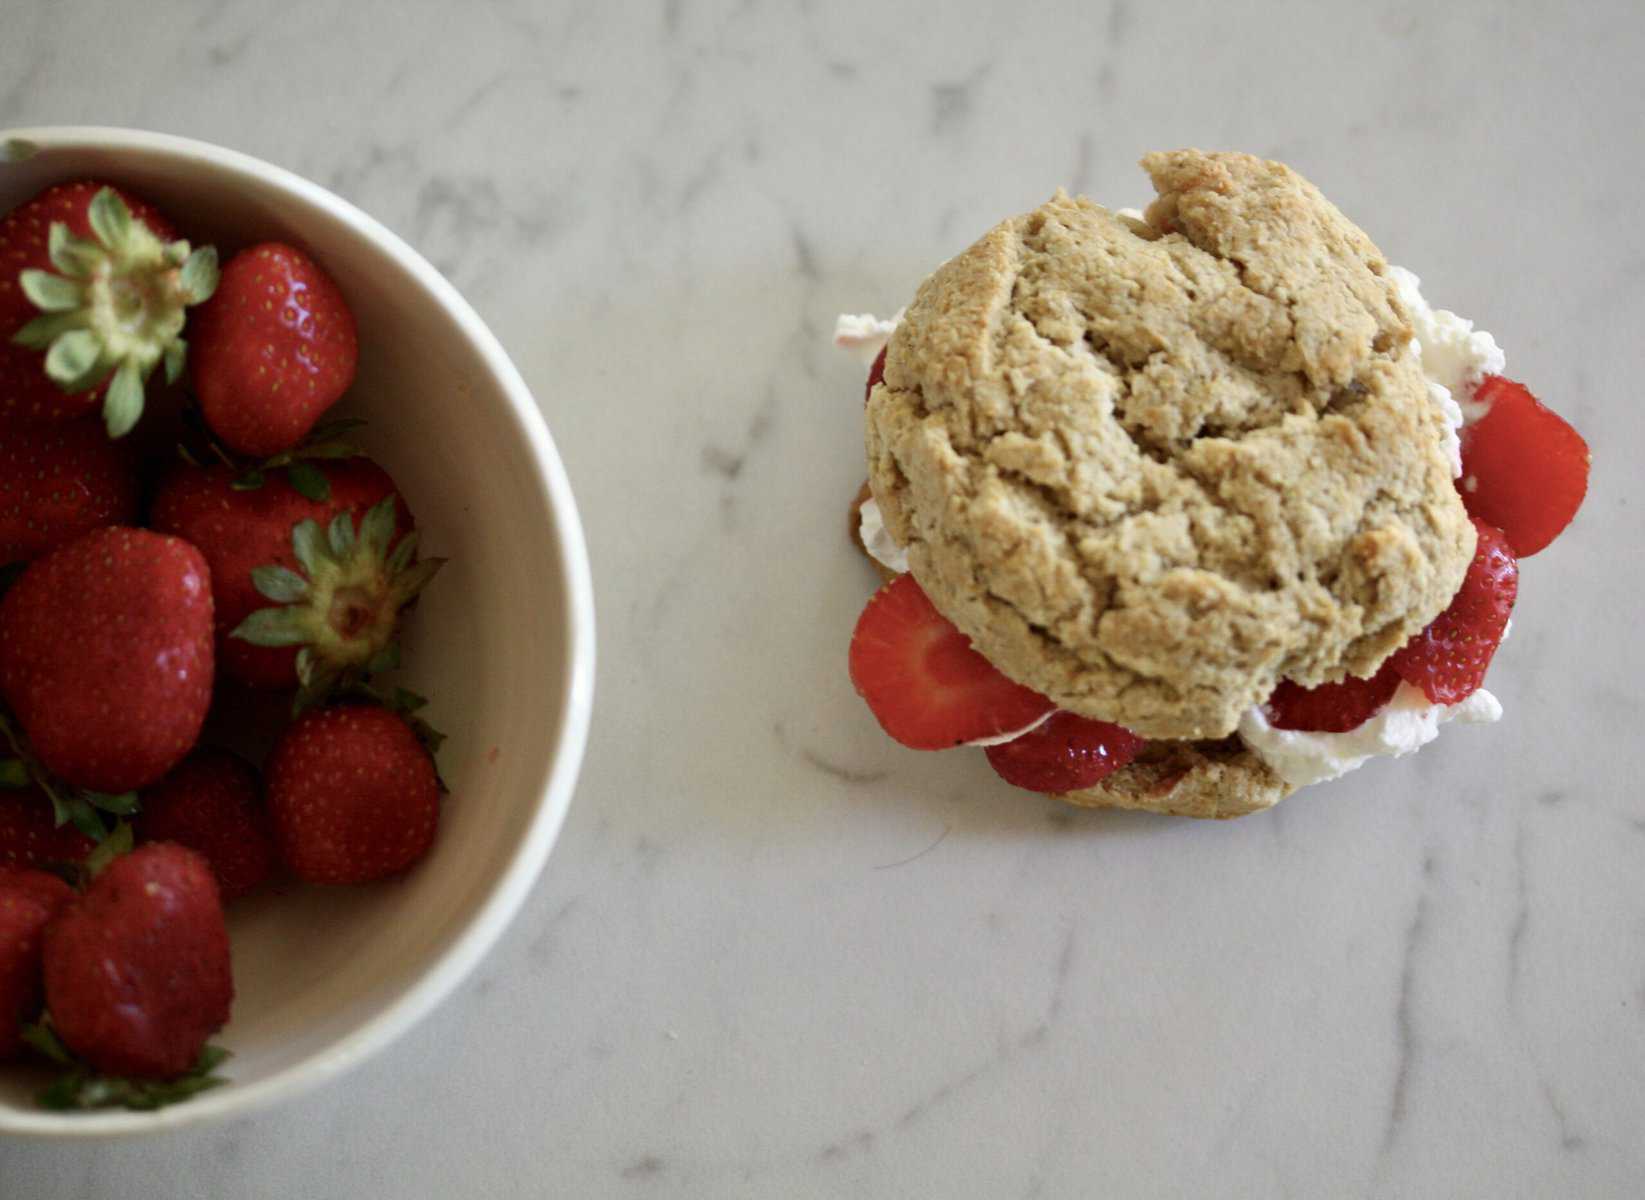 Gluten-free strawberry shortcake and a bowl of strawberries.